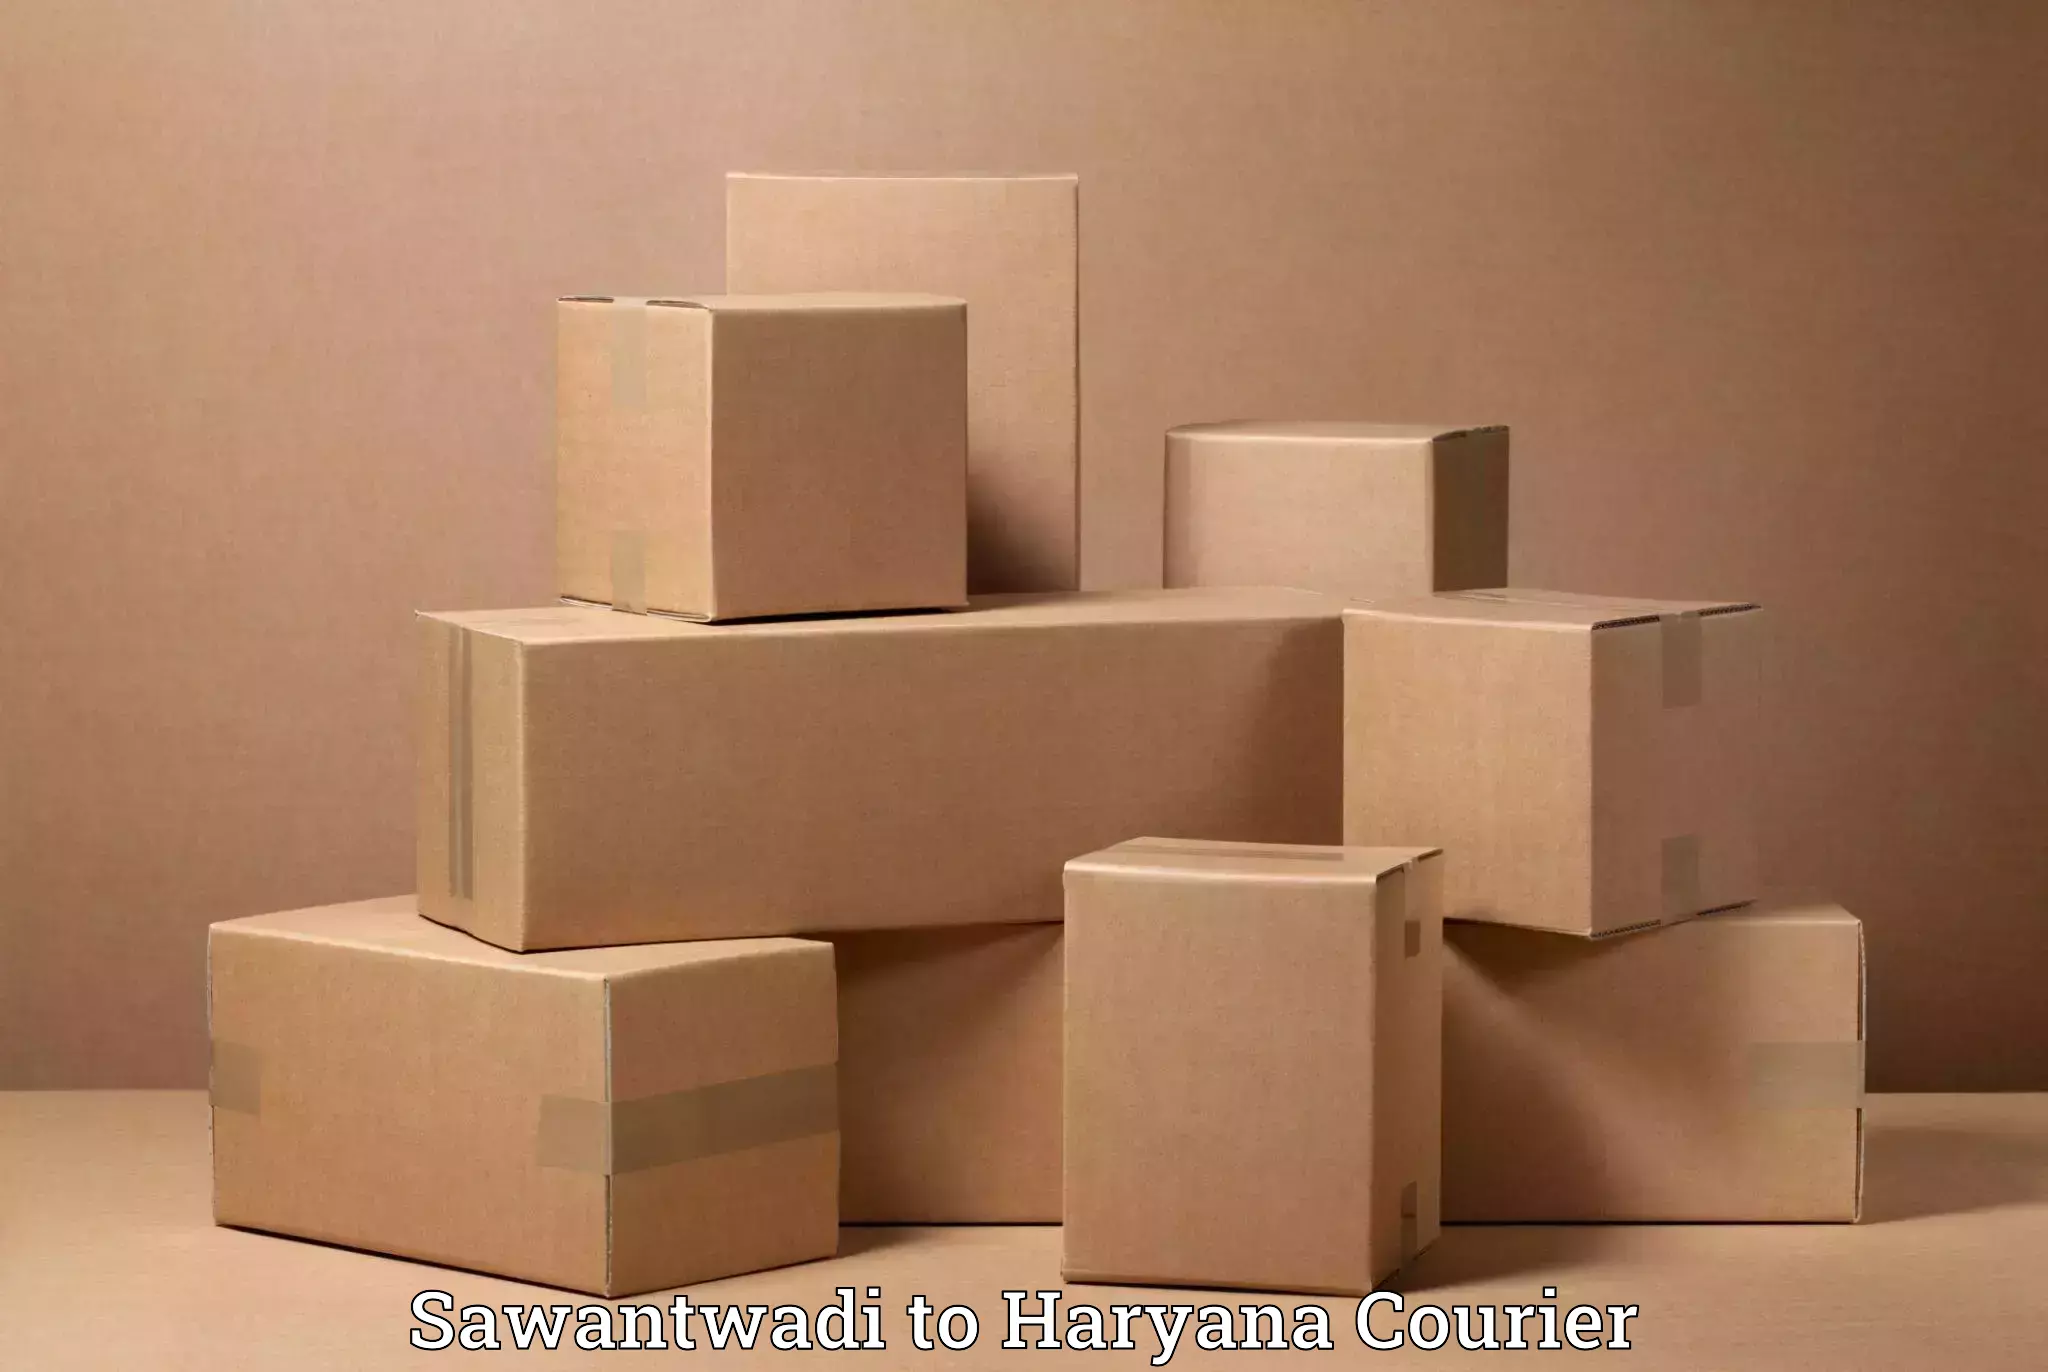 Efficient relocation services Sawantwadi to NCR Haryana